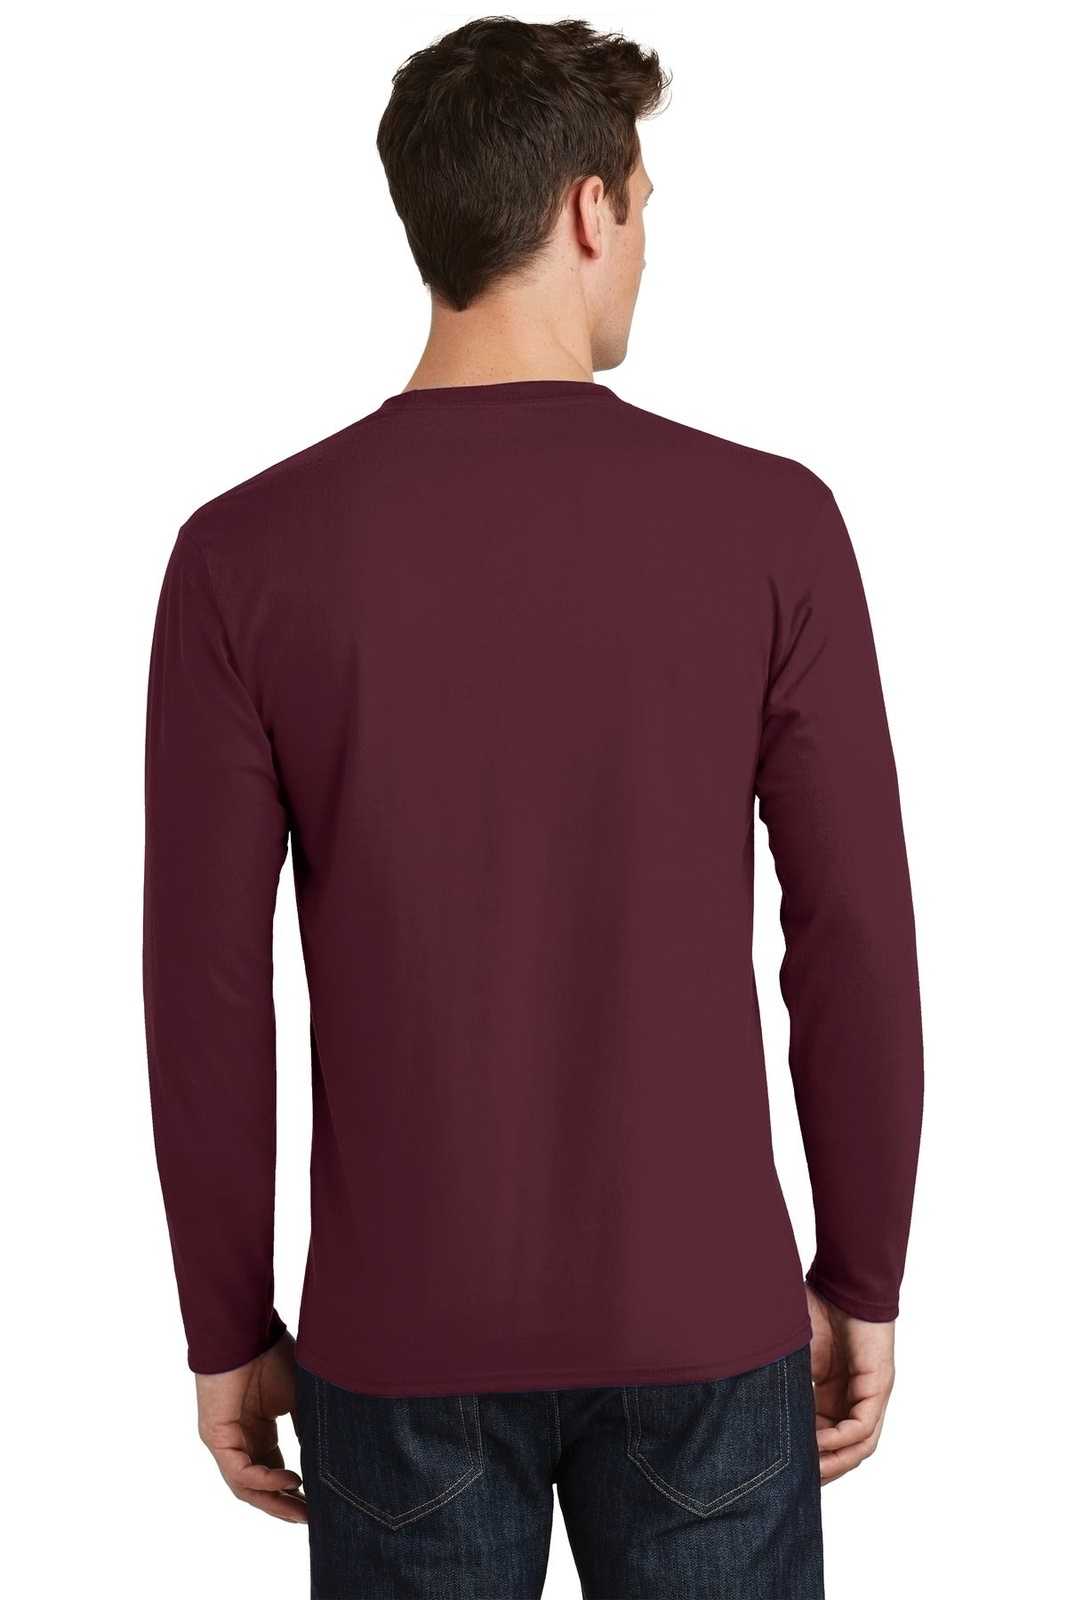 Port &amp; Company PC450LS Long Sleeve Fan Favorite Tee - Athletic Maroon - HIT a Double - 2